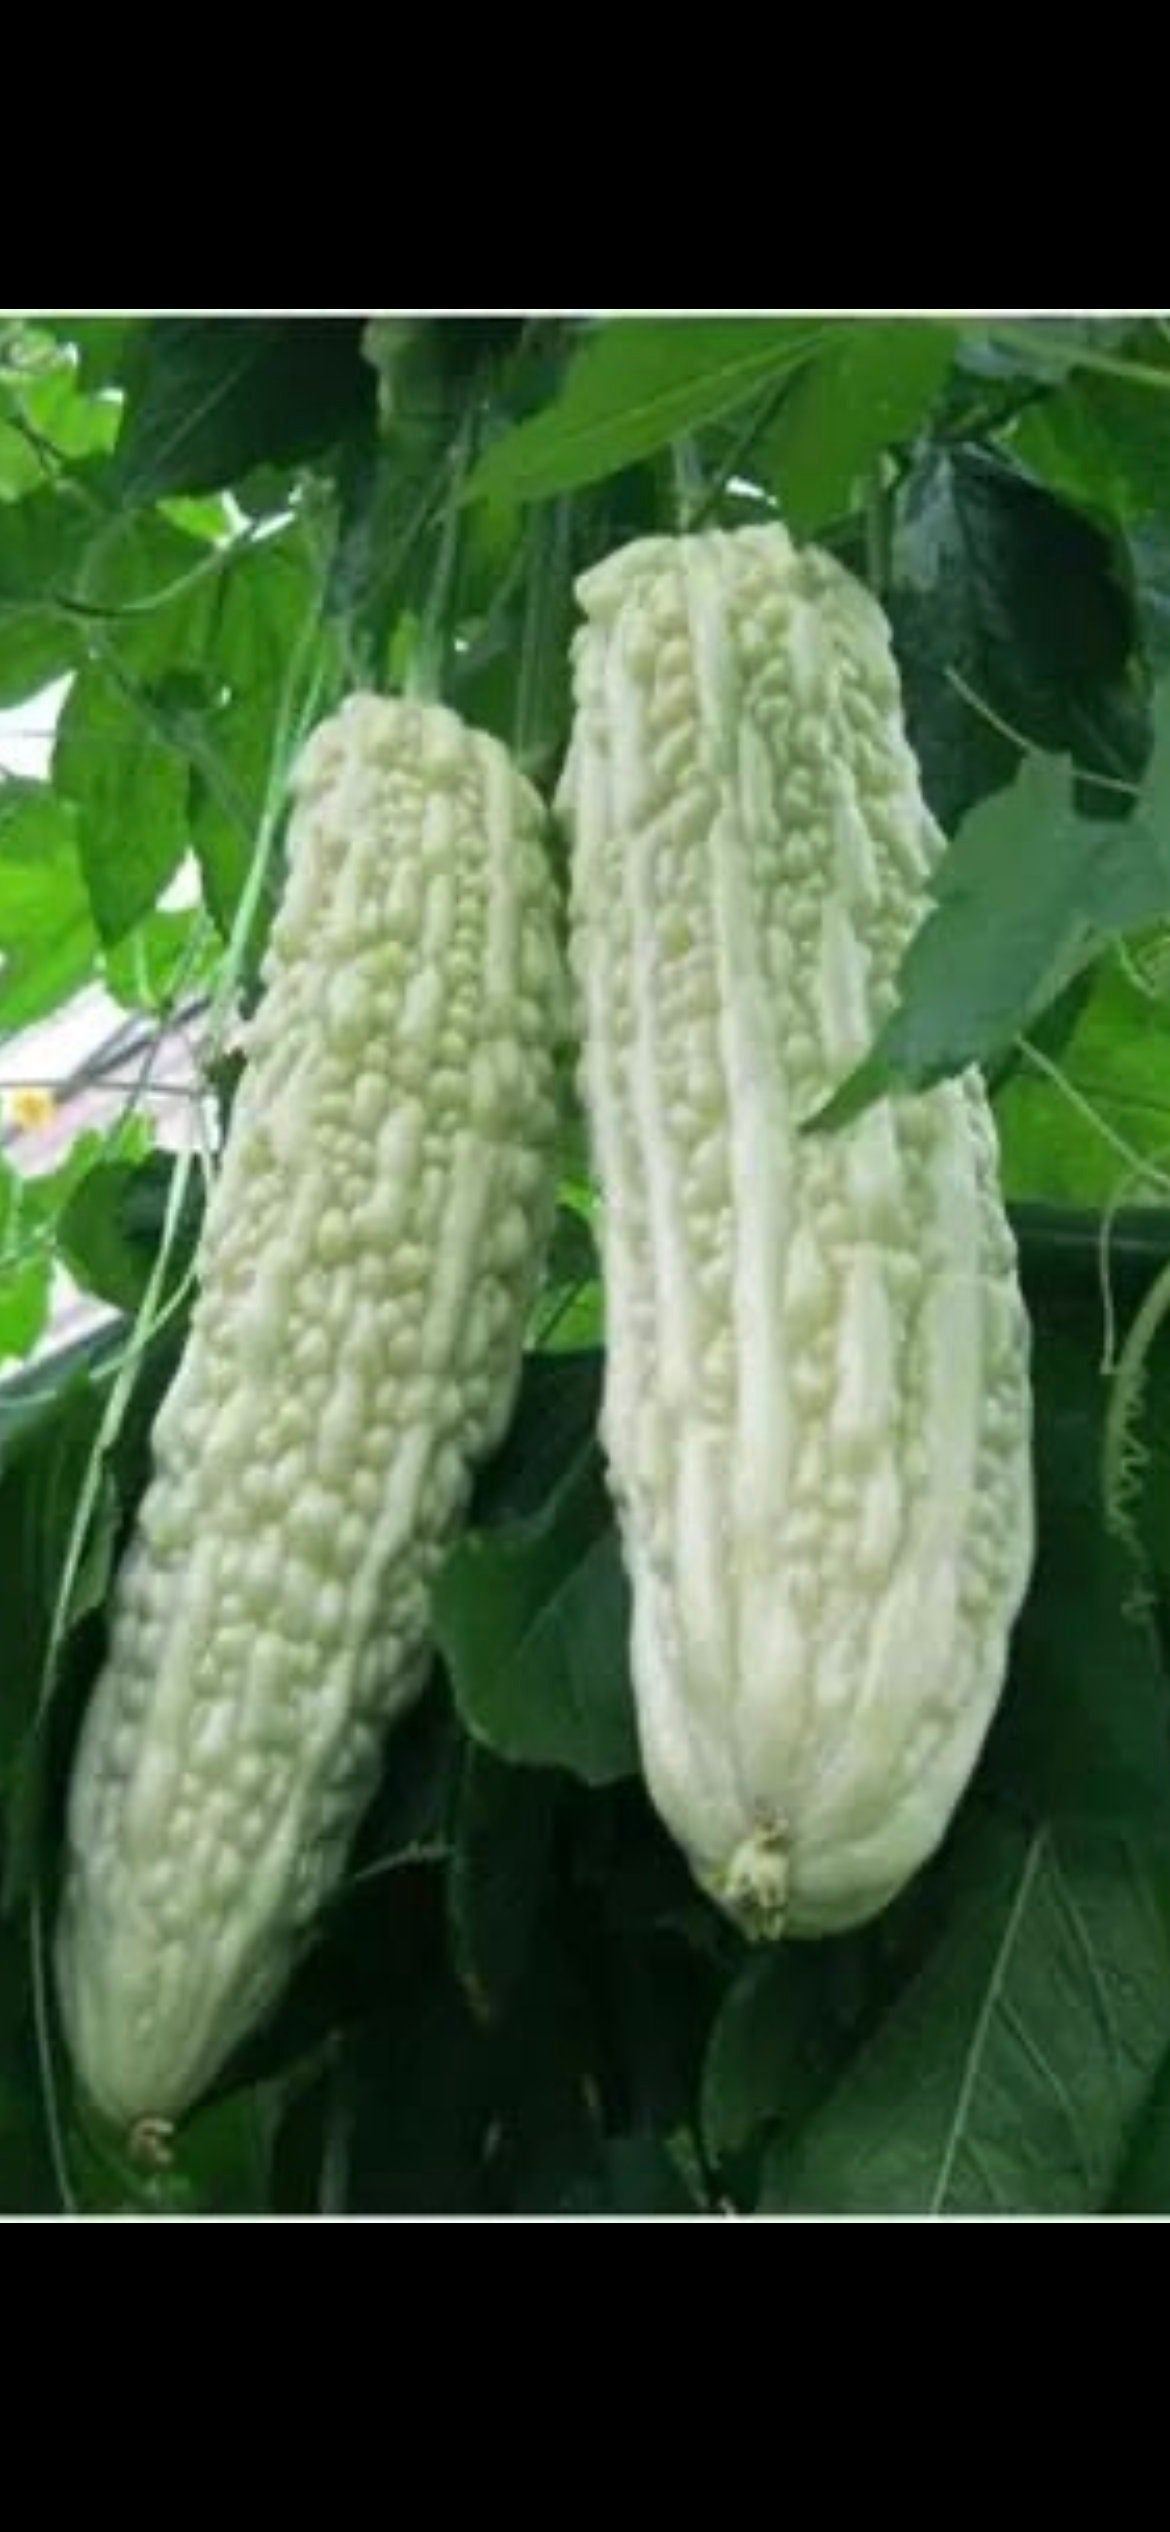 Thick Flesh Long White Bitter Gourd Seeds - 厚肉长白苦瓜种子-30 Seeds per Order-High-Yield Variety with Strong Disease Resistance